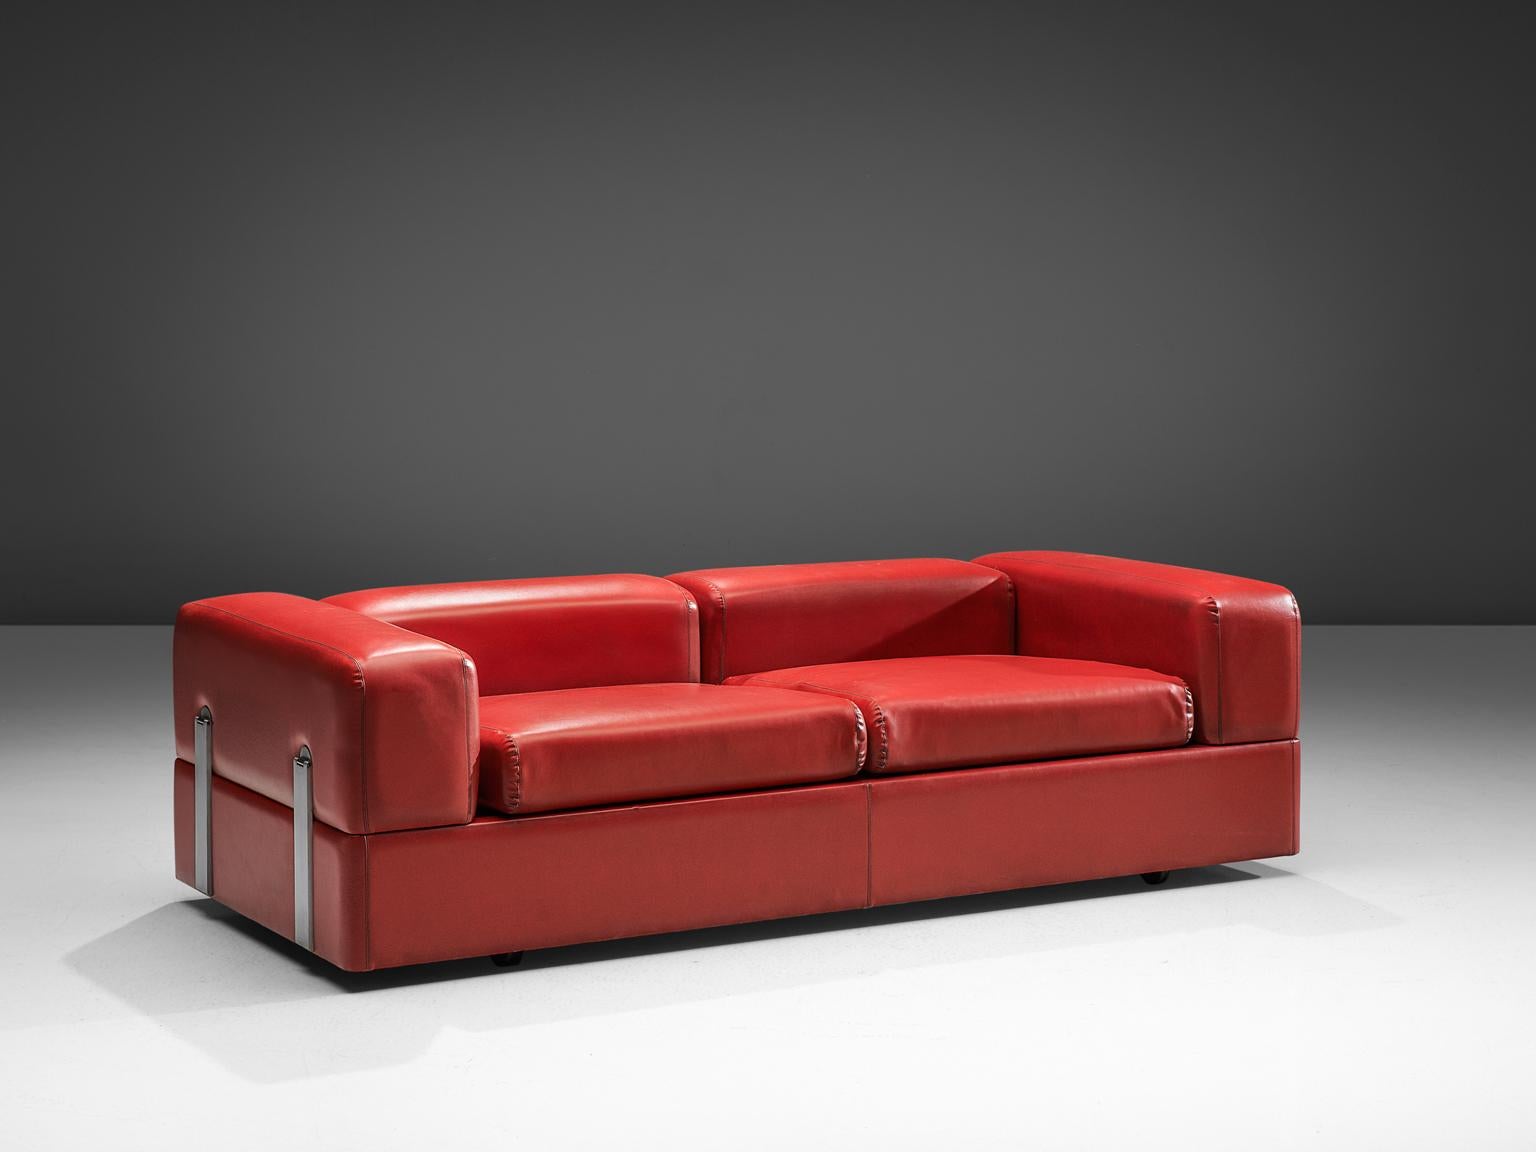 Tito Agnoli for Cinova, sofa bed 711 in red faux leather, Italy, 1960s.

This postmodern daybed and or sofa is designed by Tito Agnoli and manufactured by Cinova,. The sofa has a wooden interior and features a metal spring seat. A mattress covered